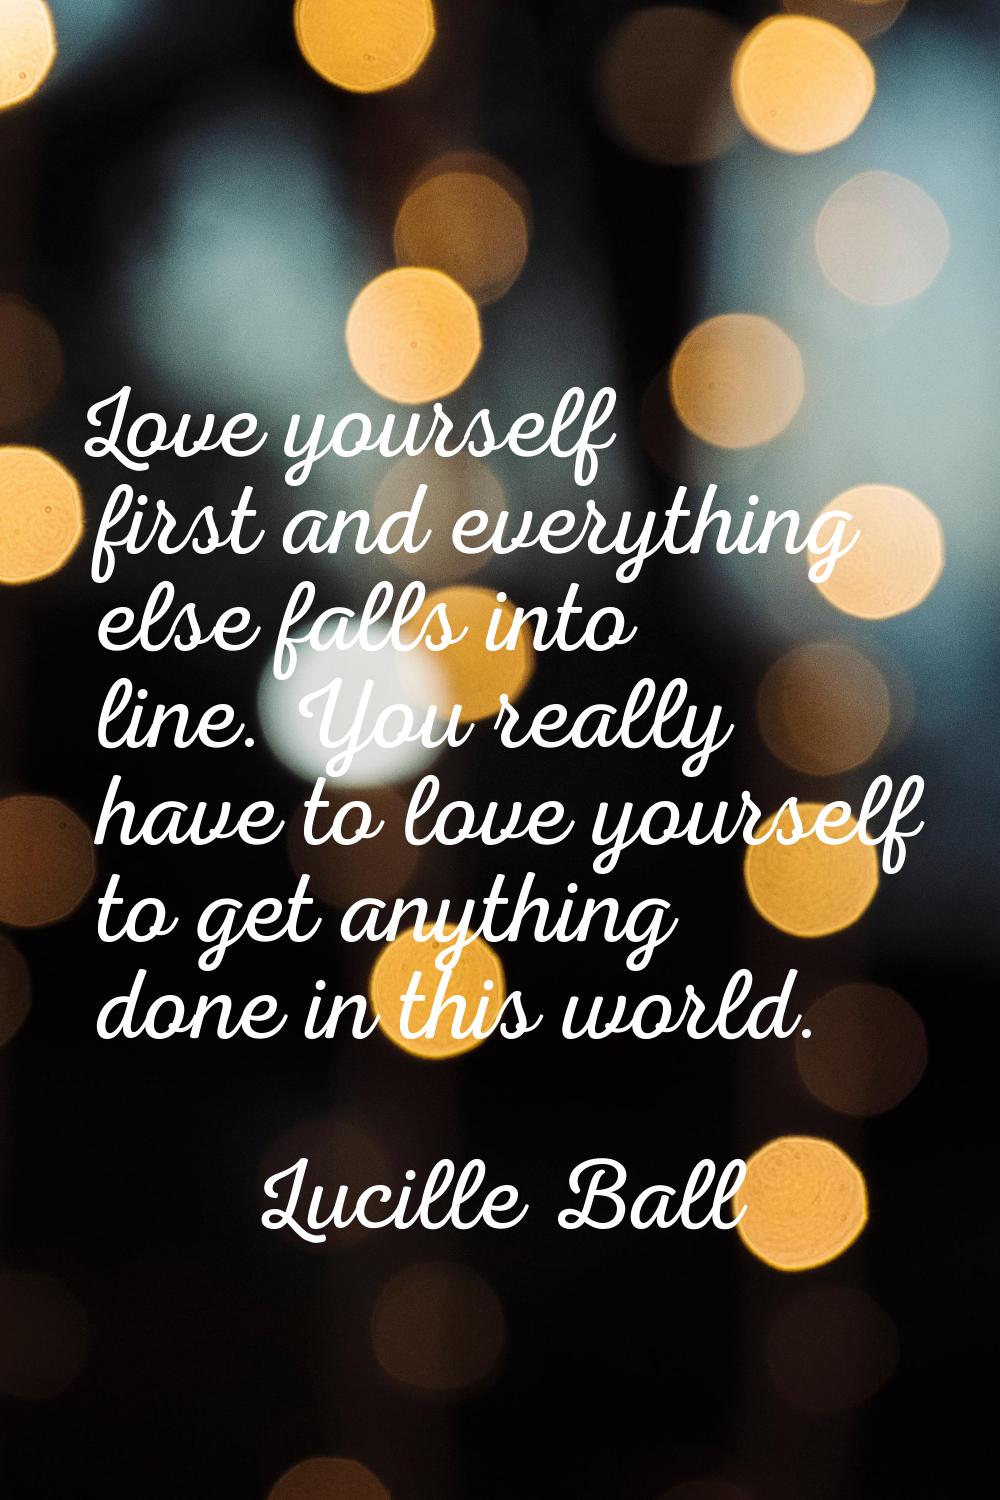 Love yourself first and everything else falls into line. You really have to love yourself to get an